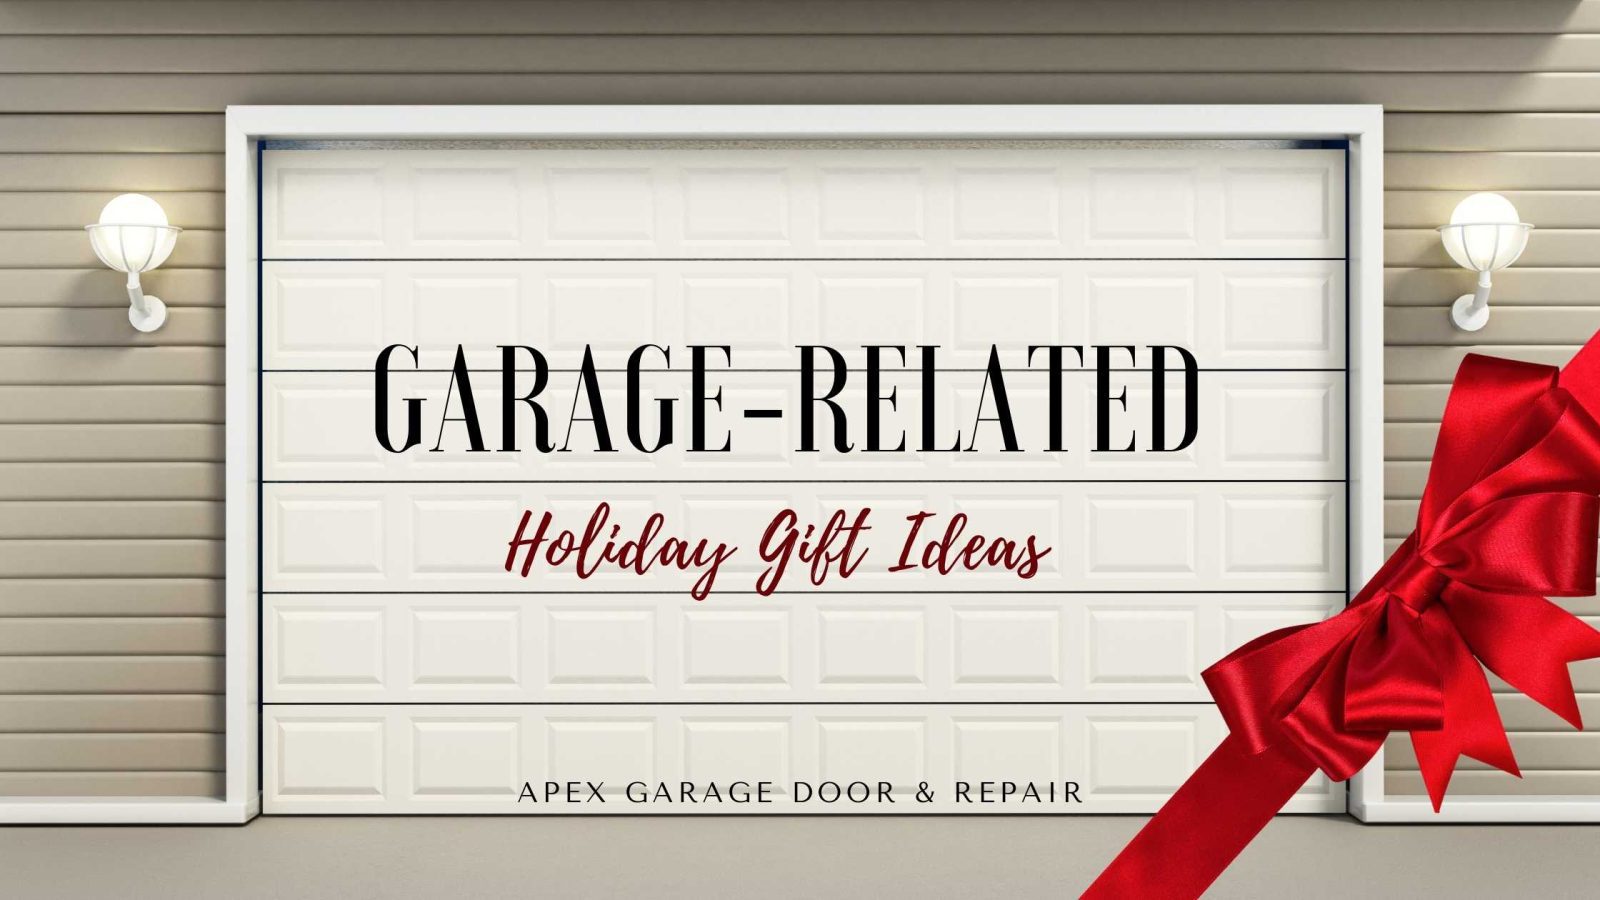 Garage-Related Holiday Gift Ideas